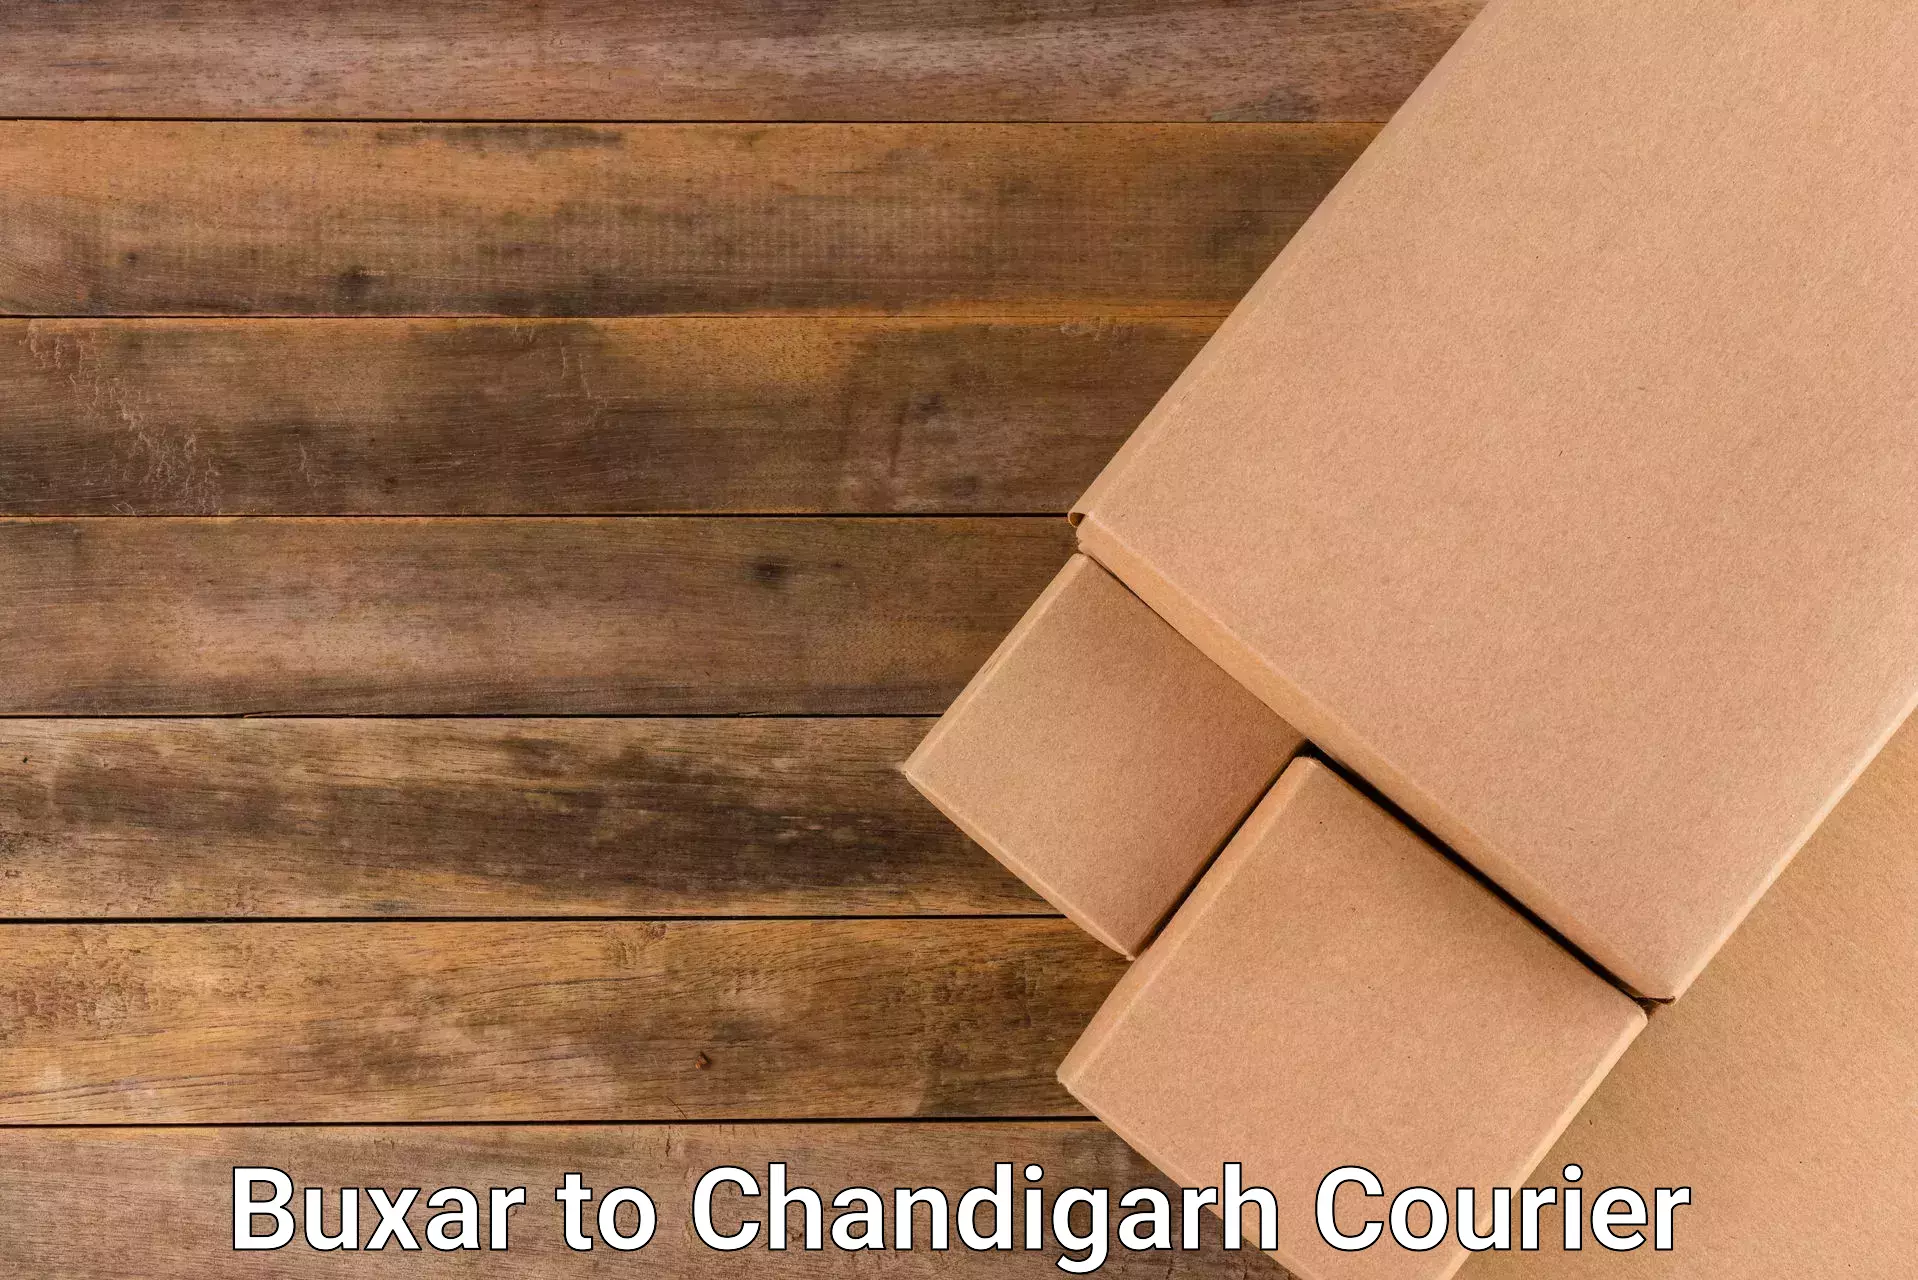 Modern delivery technologies Buxar to Chandigarh